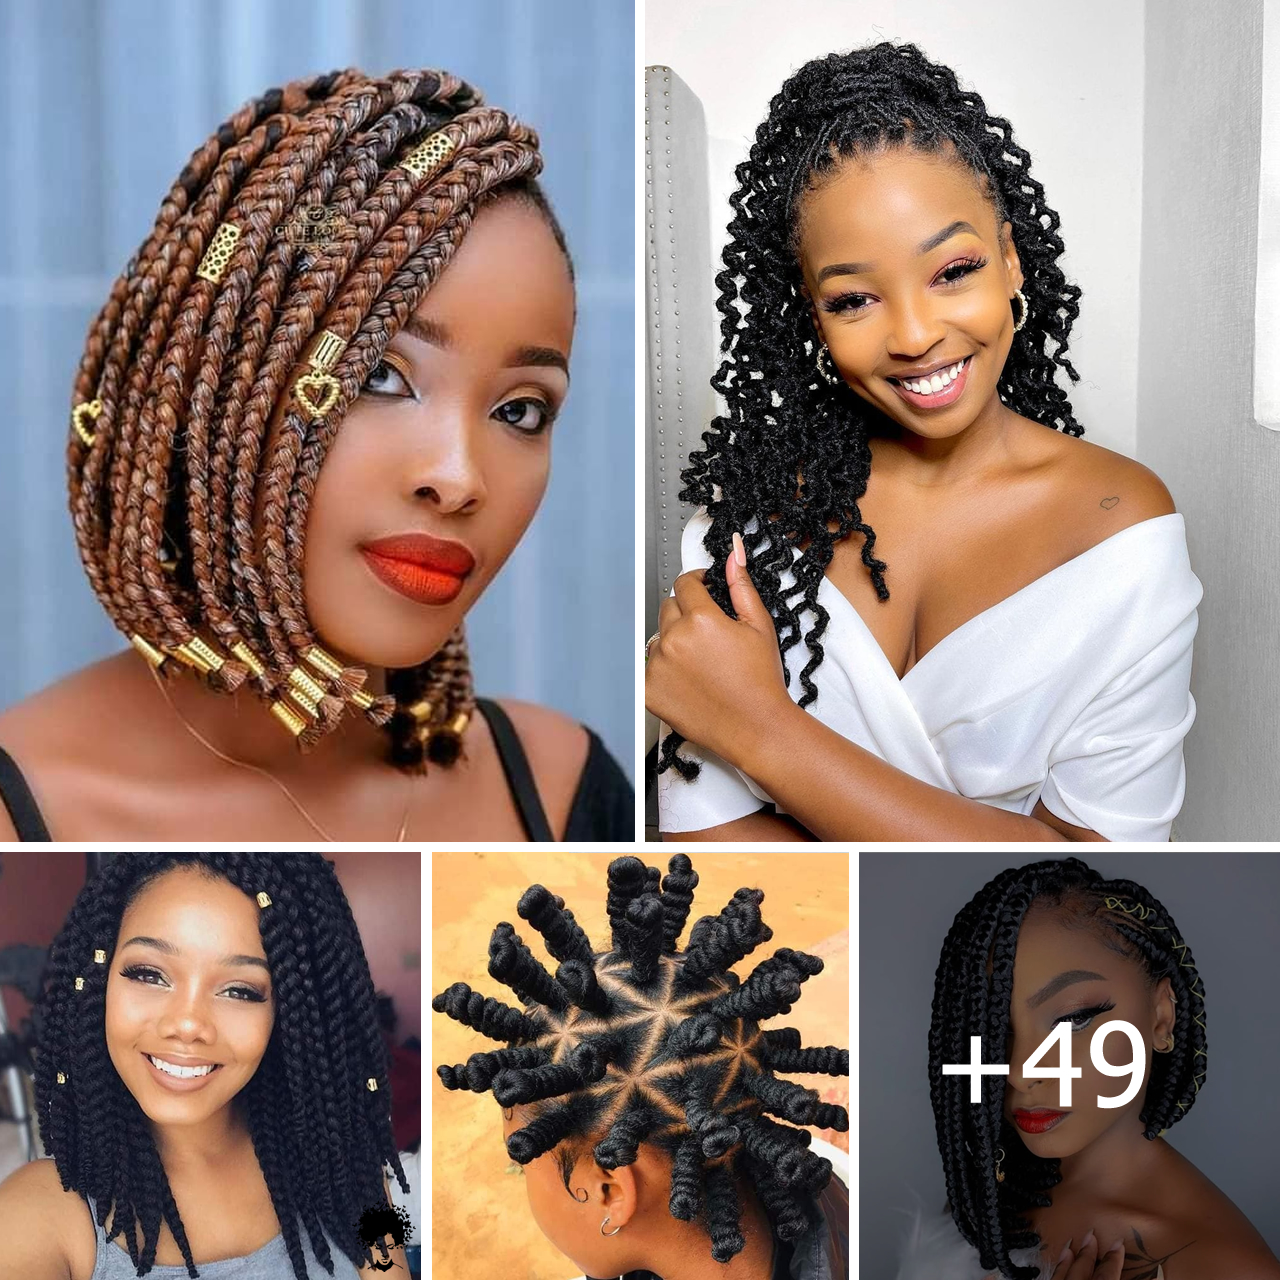 The Best Braided Hairstyles to Try Right Now